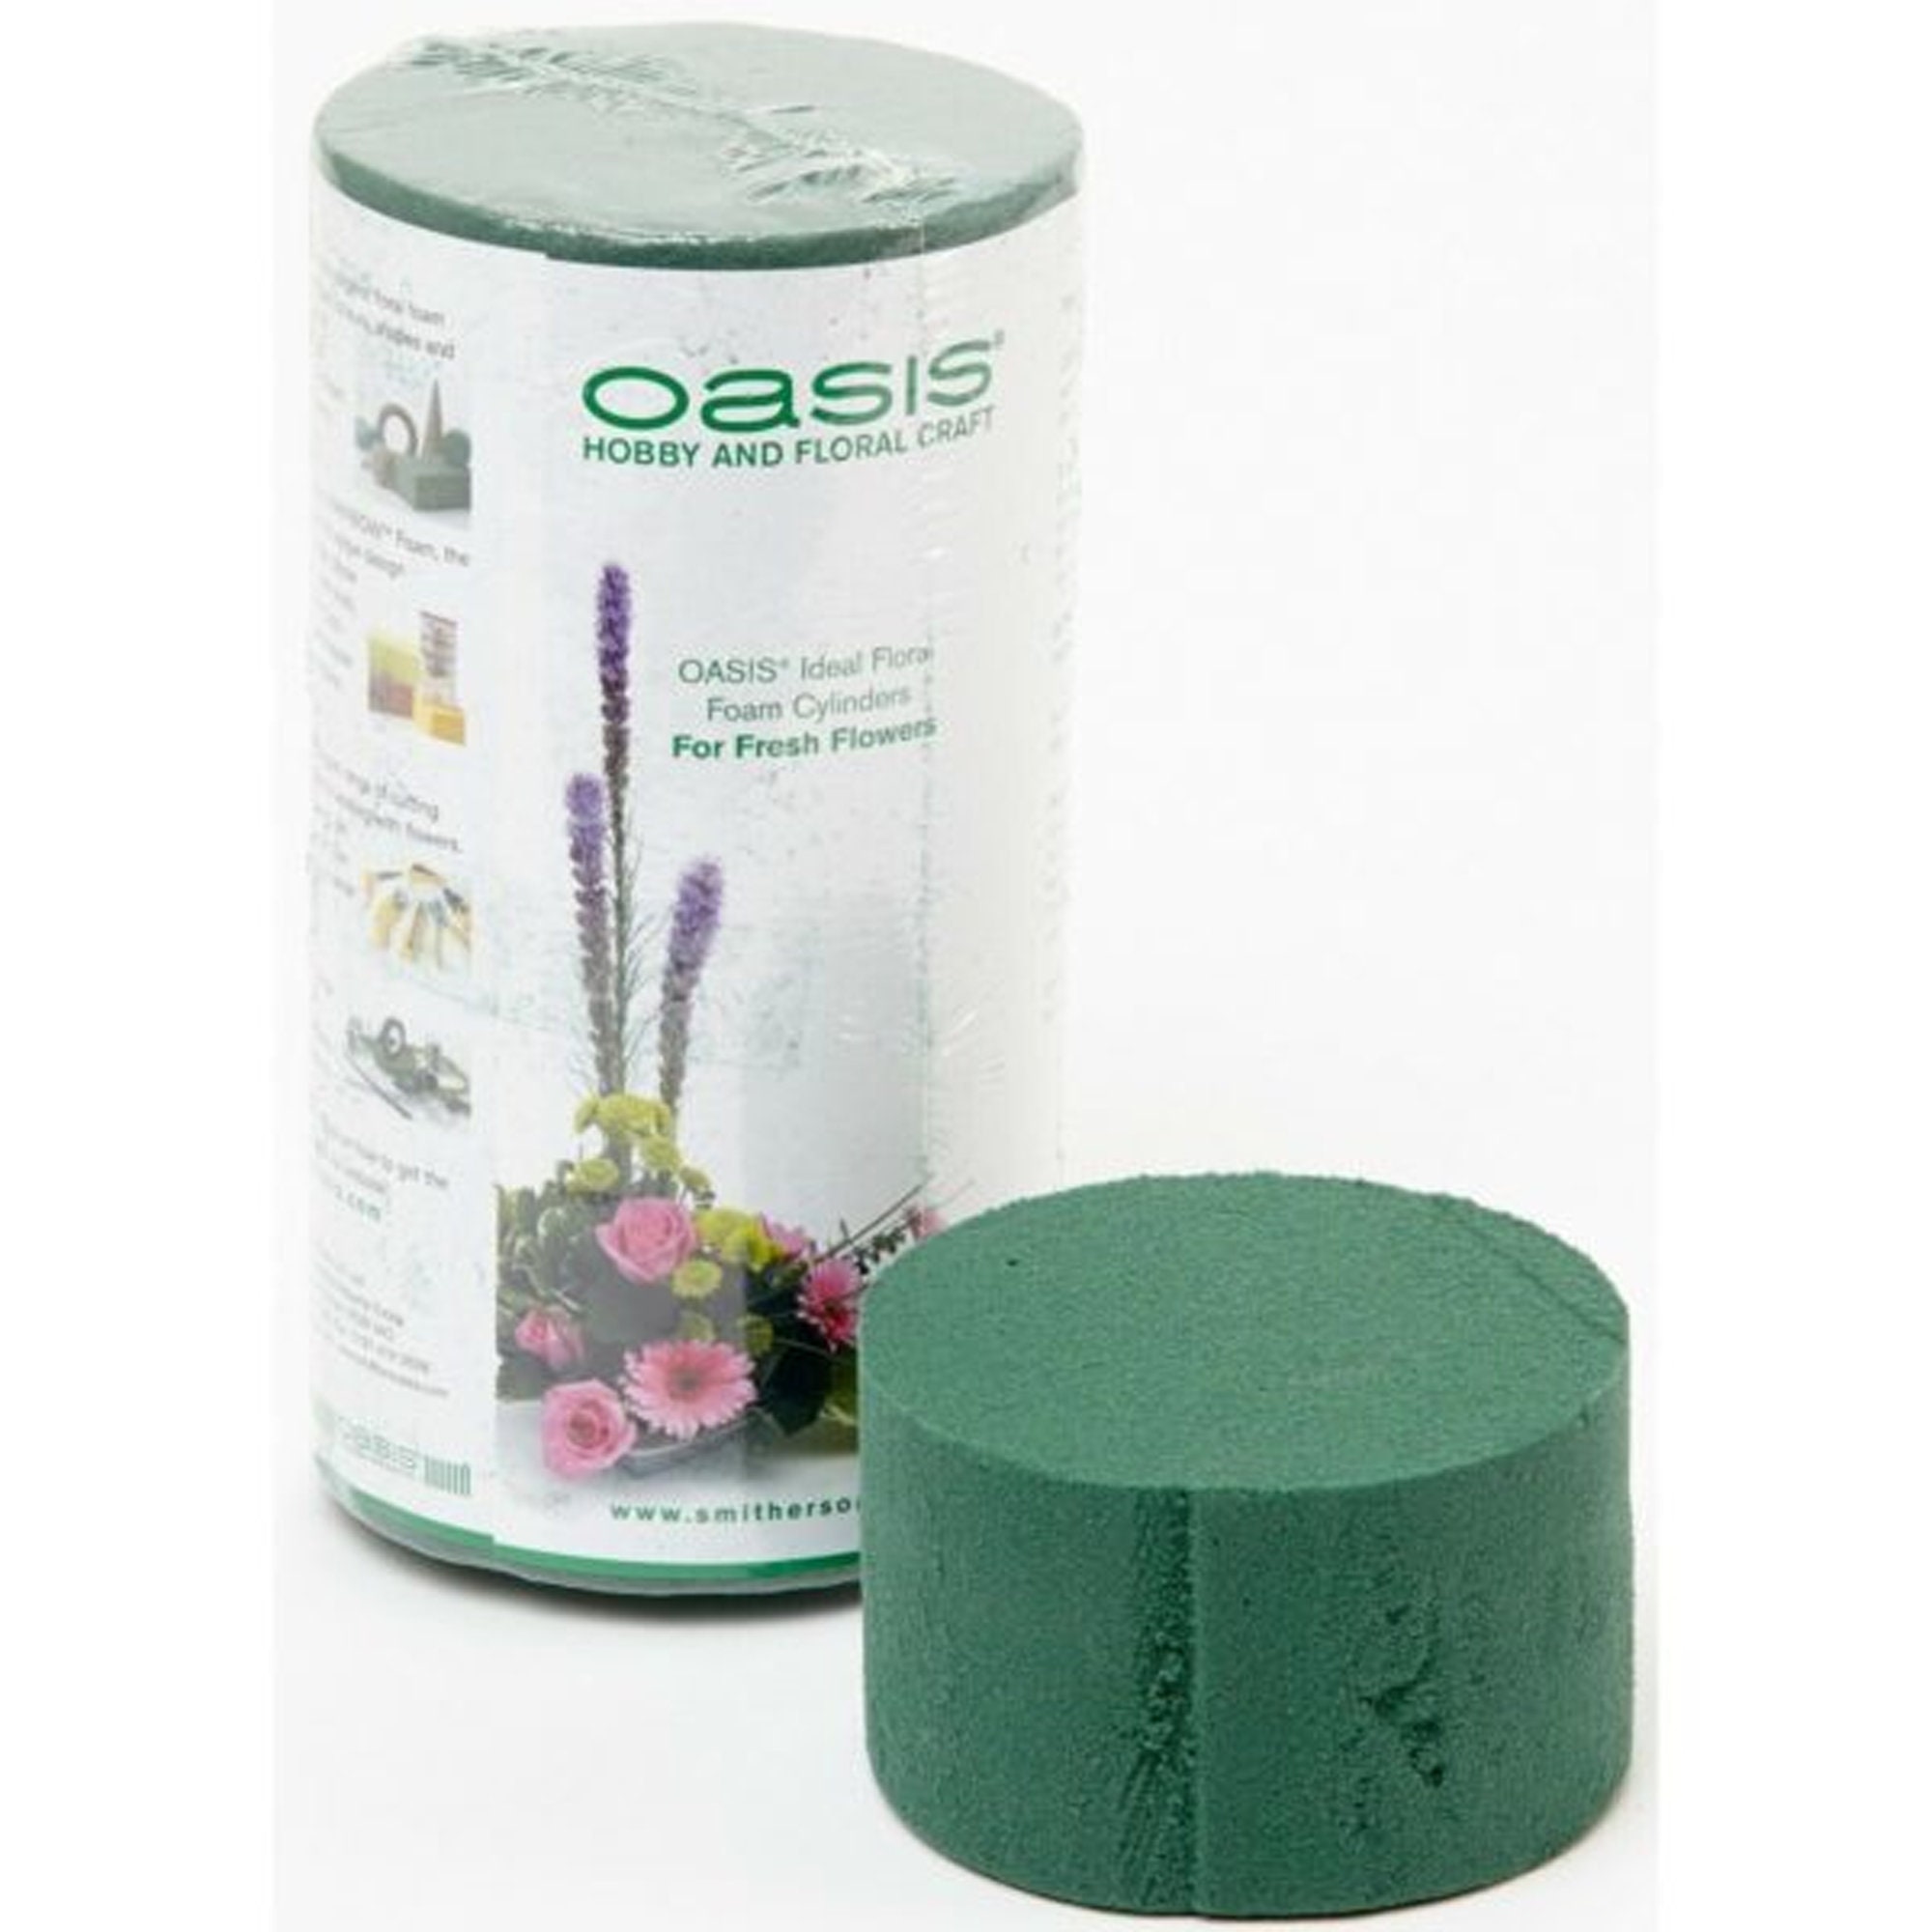 Oasis® SEC DRY Floral Foam Cylinders Round Flowers Sponge Crafts Florist,  for Artificial and Silk Flower Arrangements and DIY Florists 